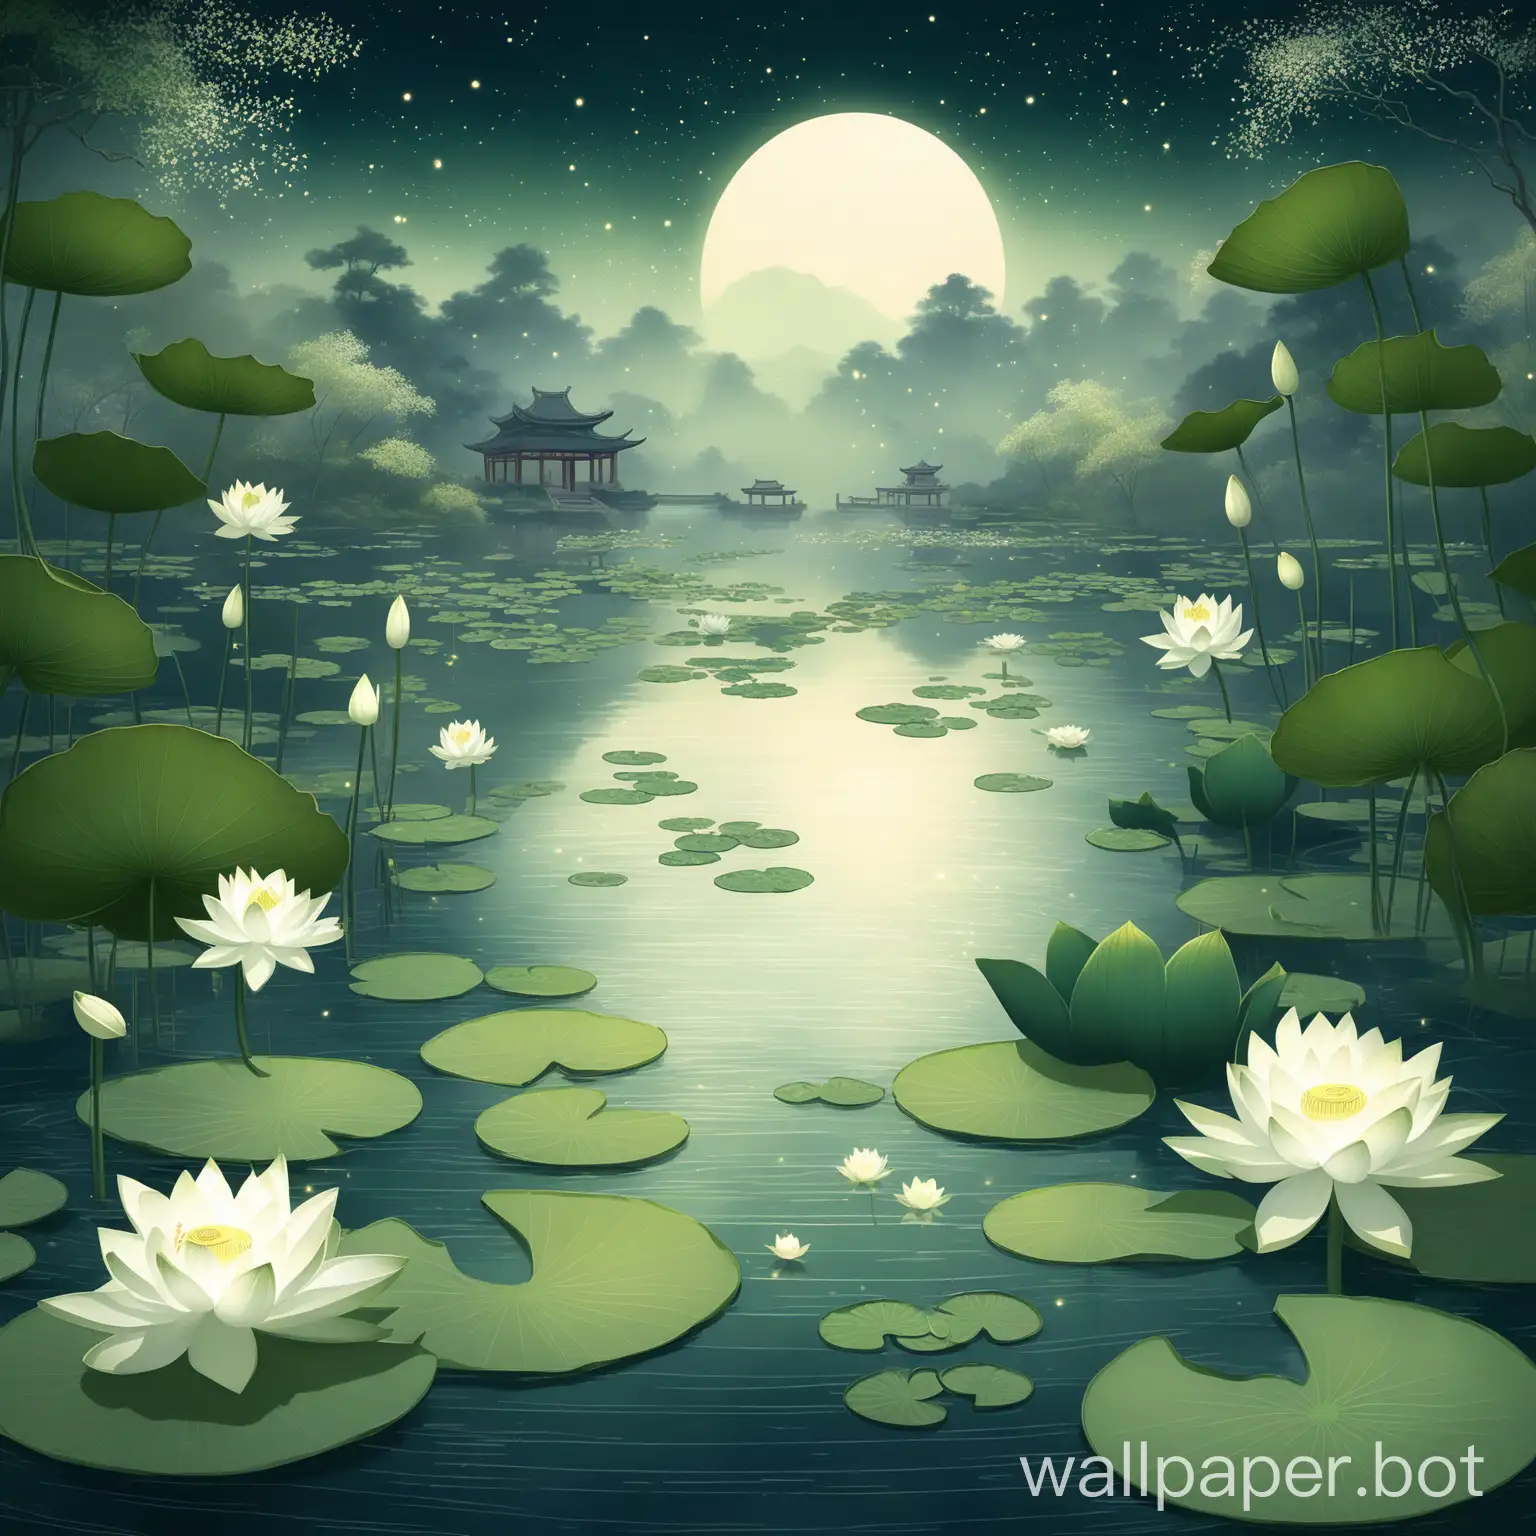 Design a serene and artistic wallpaper depicting a tranquil water garden. The background should be a deep, calming blend of green and dark blue tones. Include several large, overlapping lily pads with intricate textures and shades of green. Add elegant white lotus flowers with soft yellow centers, some fully bloomed and others as closed buds, artfully distributed across the lily pads. Incorporate subtle, glowing particles in the air to enhance the mystical ambiance. The overall style should reflect traditional Asian art, focusing on tranquility and natural beauty